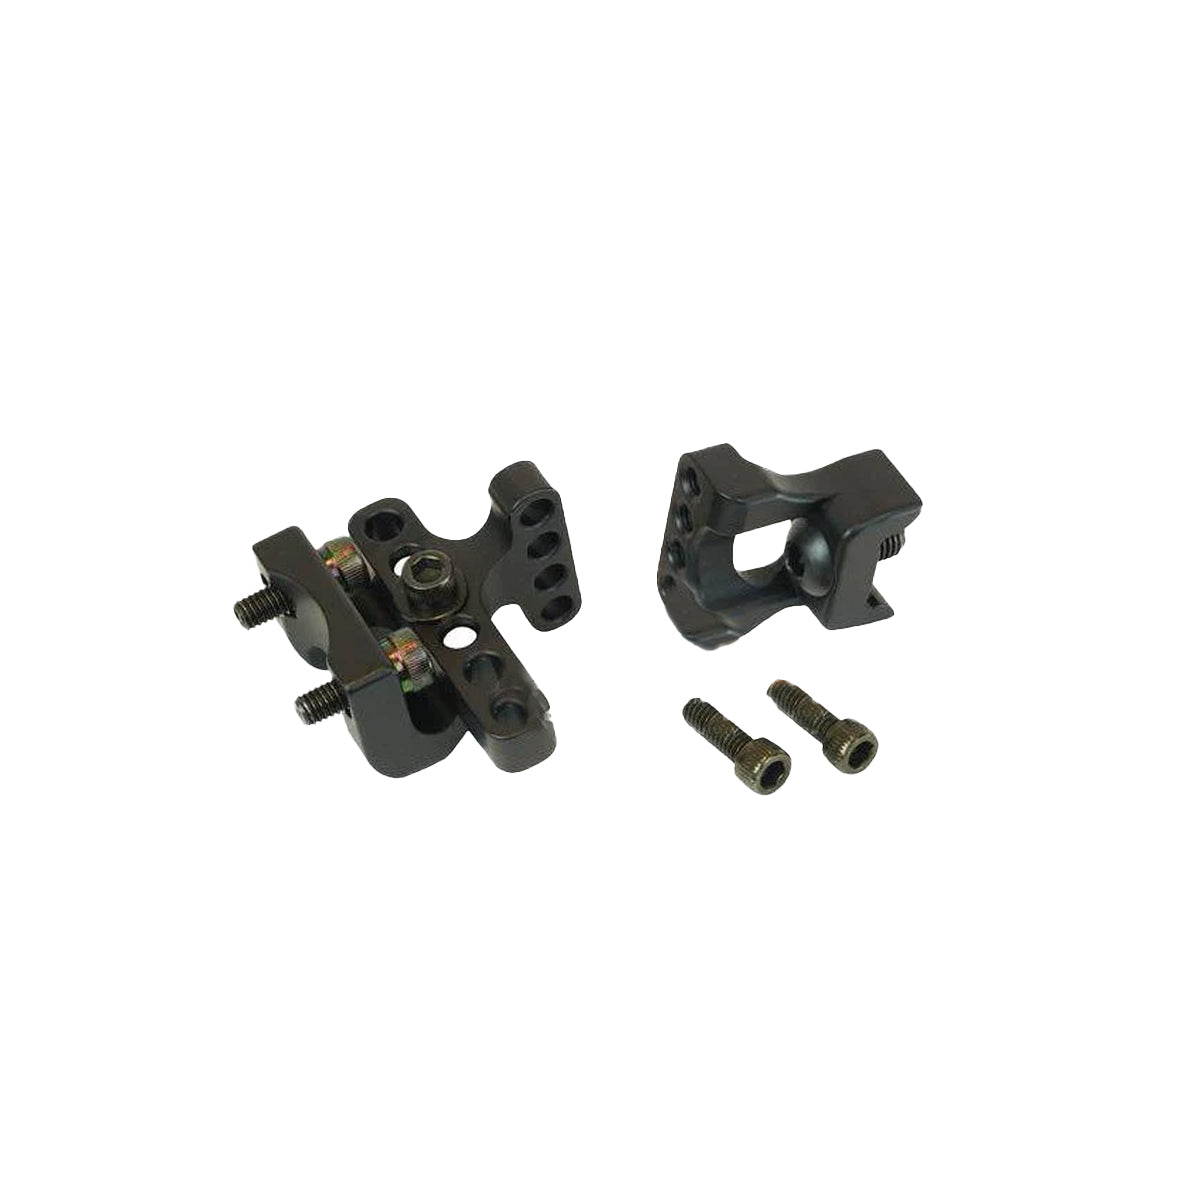 Spot Hogg 3rd Axis Quick Disconnect Assembly in Single Pin and Double Pin by GOHUNT | Spot Hogg - GOHUNT Shop